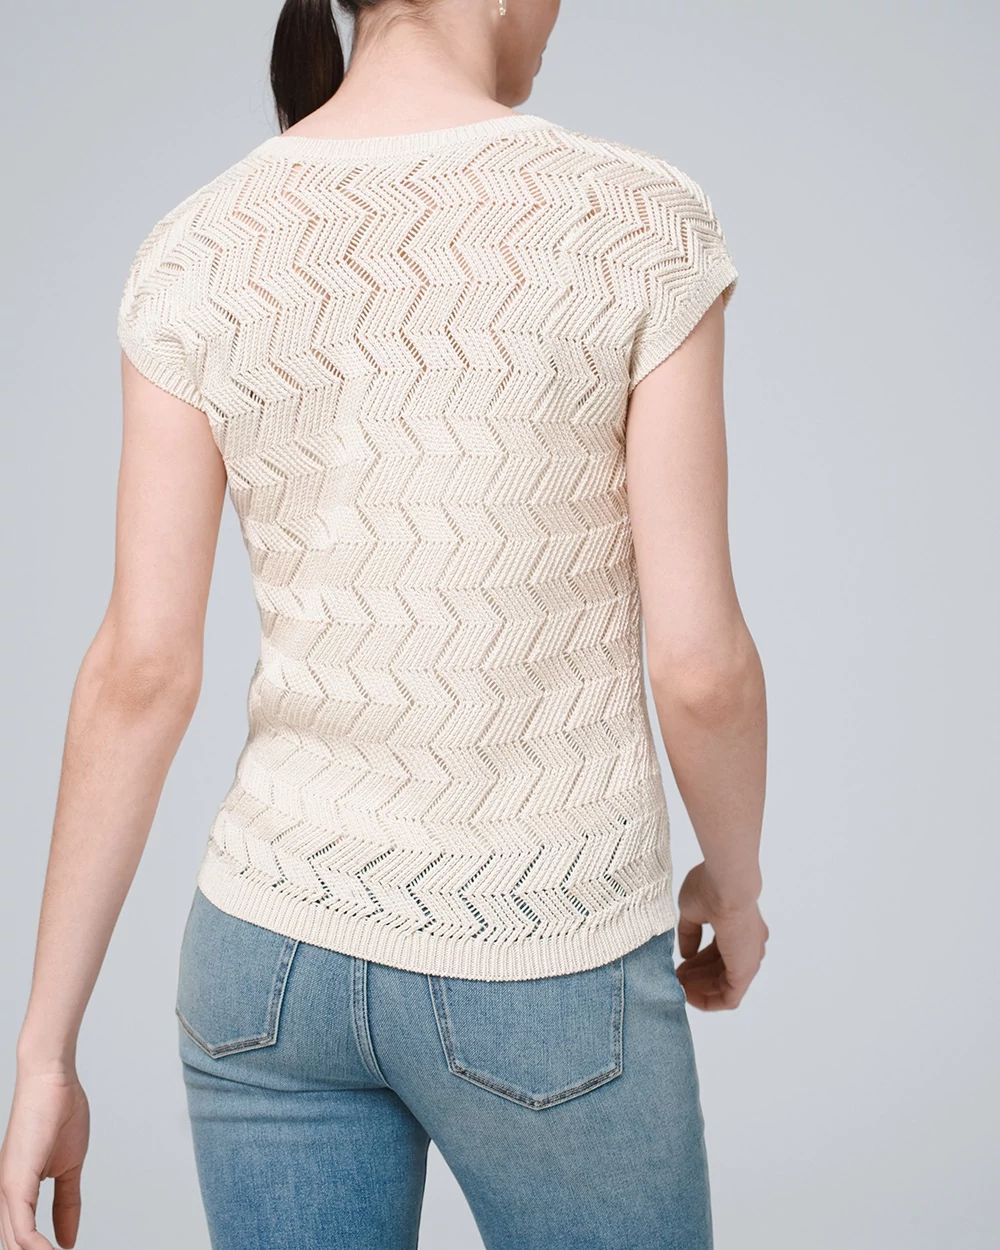 Petite Short Sleeve V-neck Chevron Stitch Pullover click to view larger image.